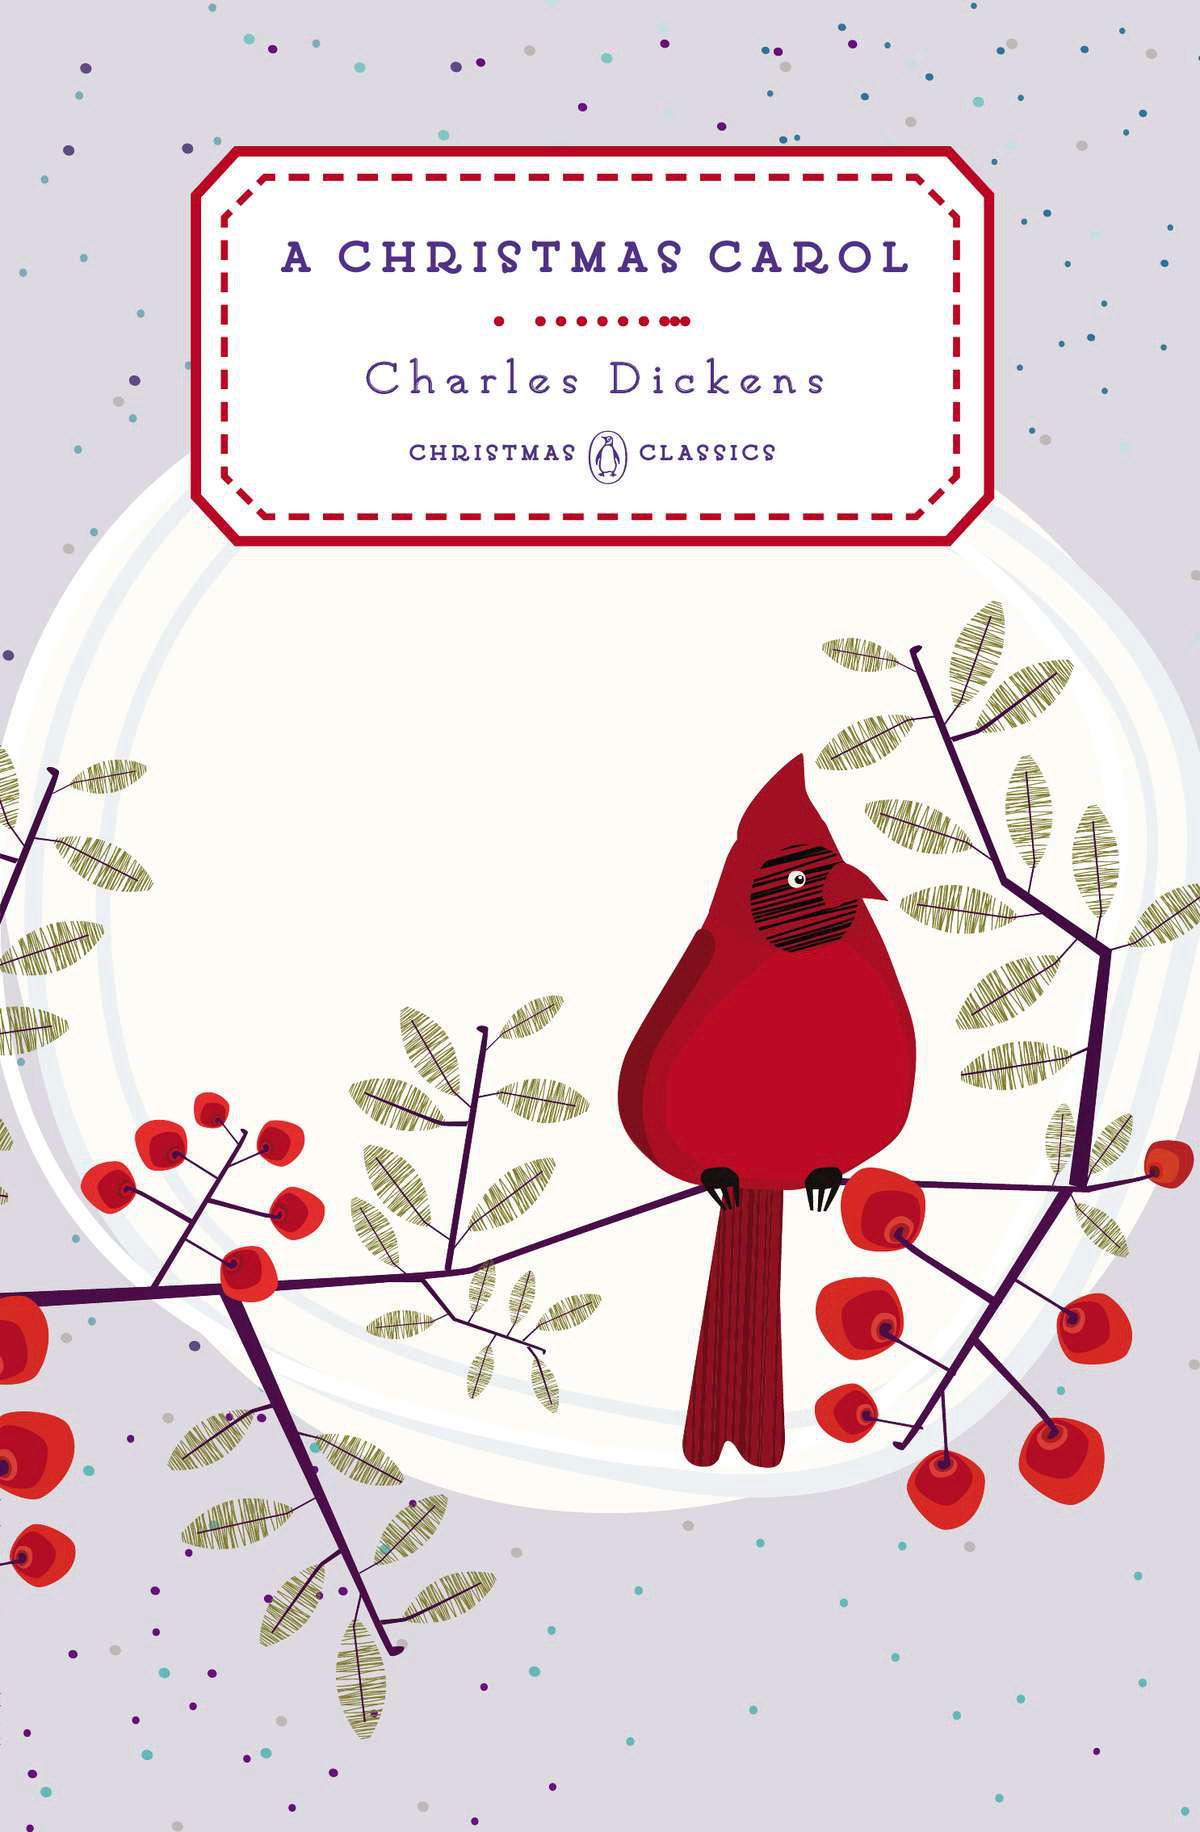 a christmas carol by charles dickens - penguin christmas classics